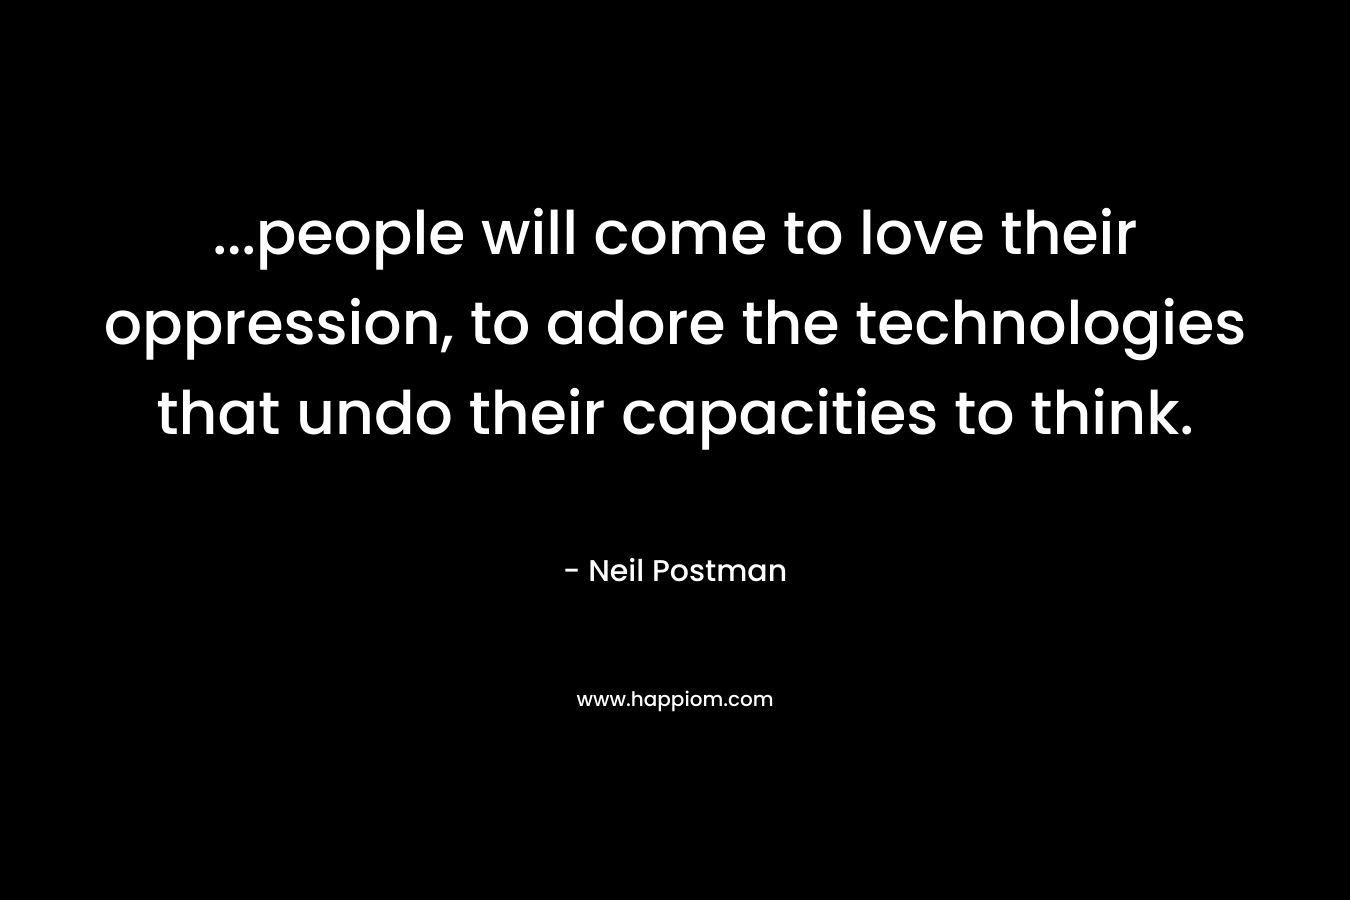 …people will come to love their oppression, to adore the technologies that undo their capacities to think. – Neil Postman